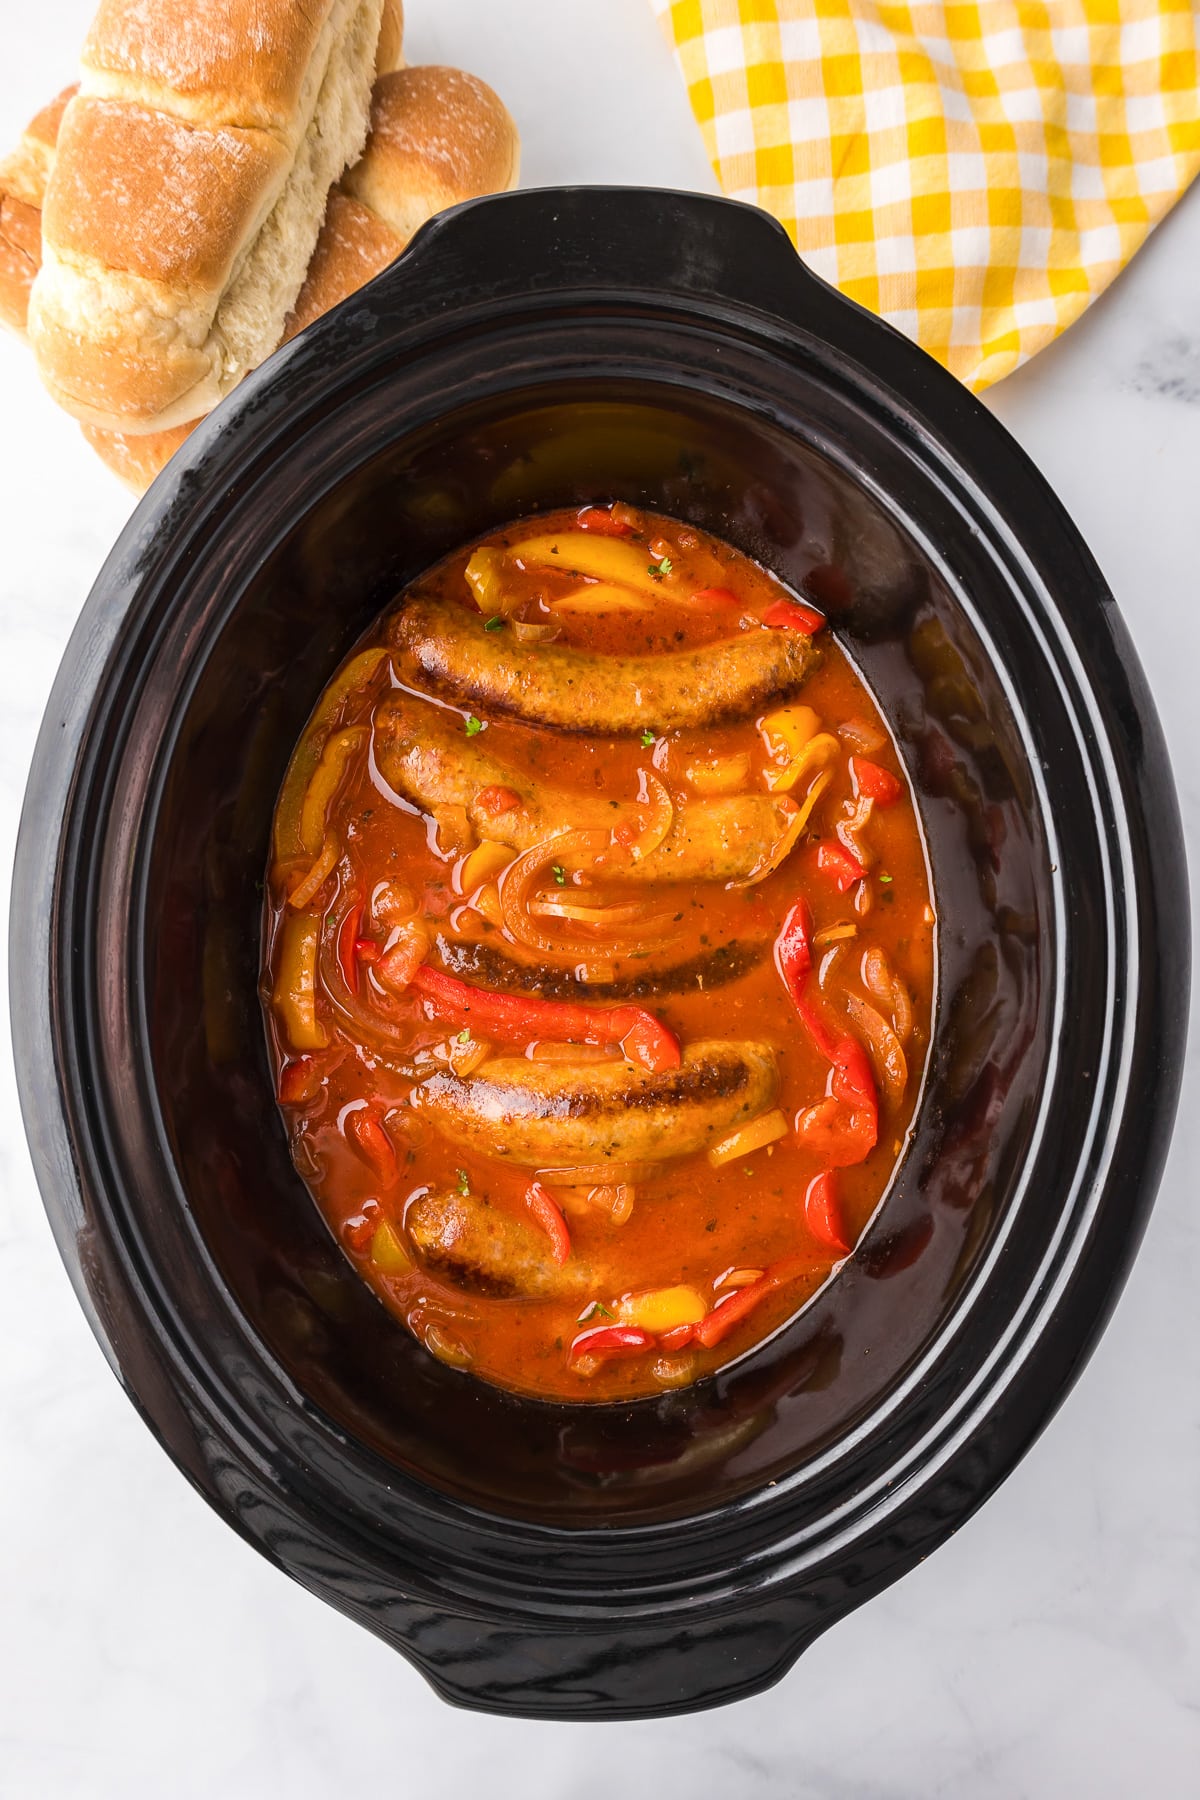 A crock pot full of Italian sausages and peppers in a red marinara sauce with rolls nearby.